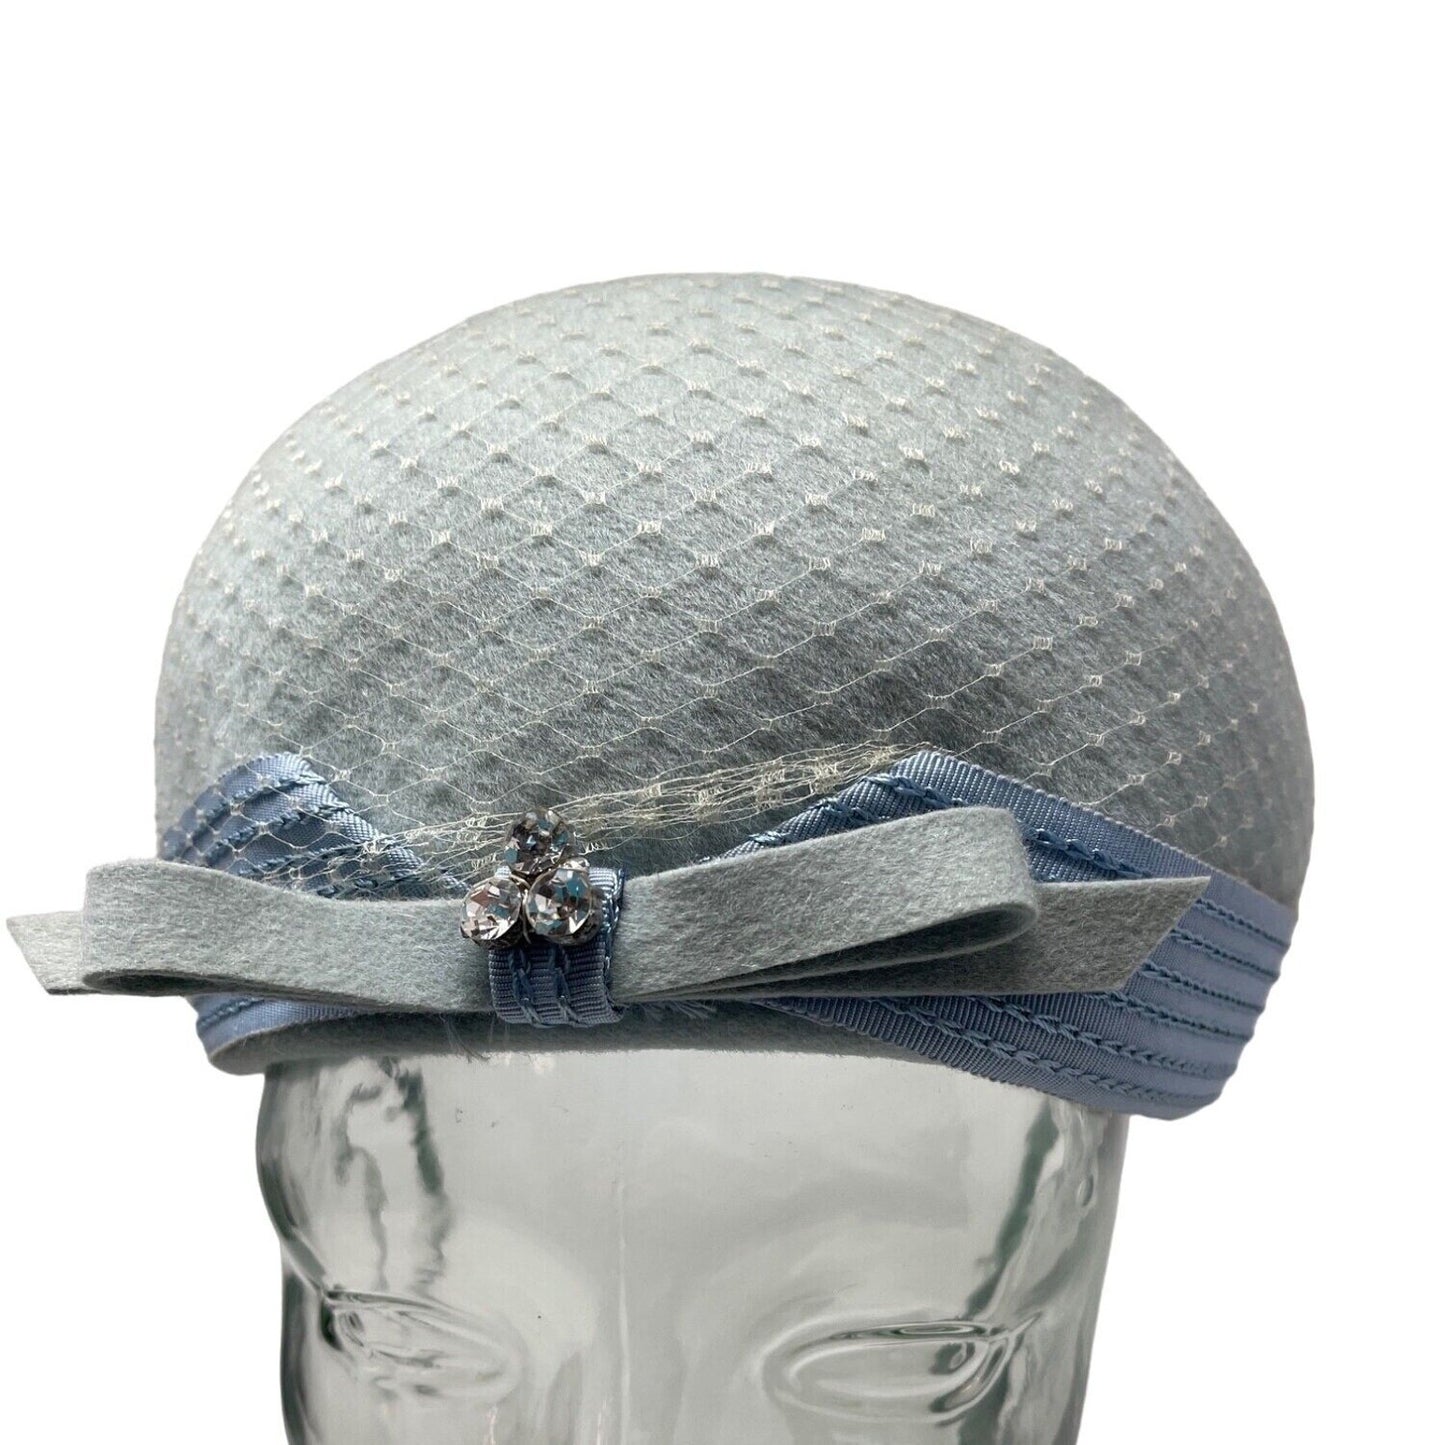 Ritz Henry Pollack Hat Dusty Blue Jewel Bow Band Baby Blue Net Cover Circa 60s